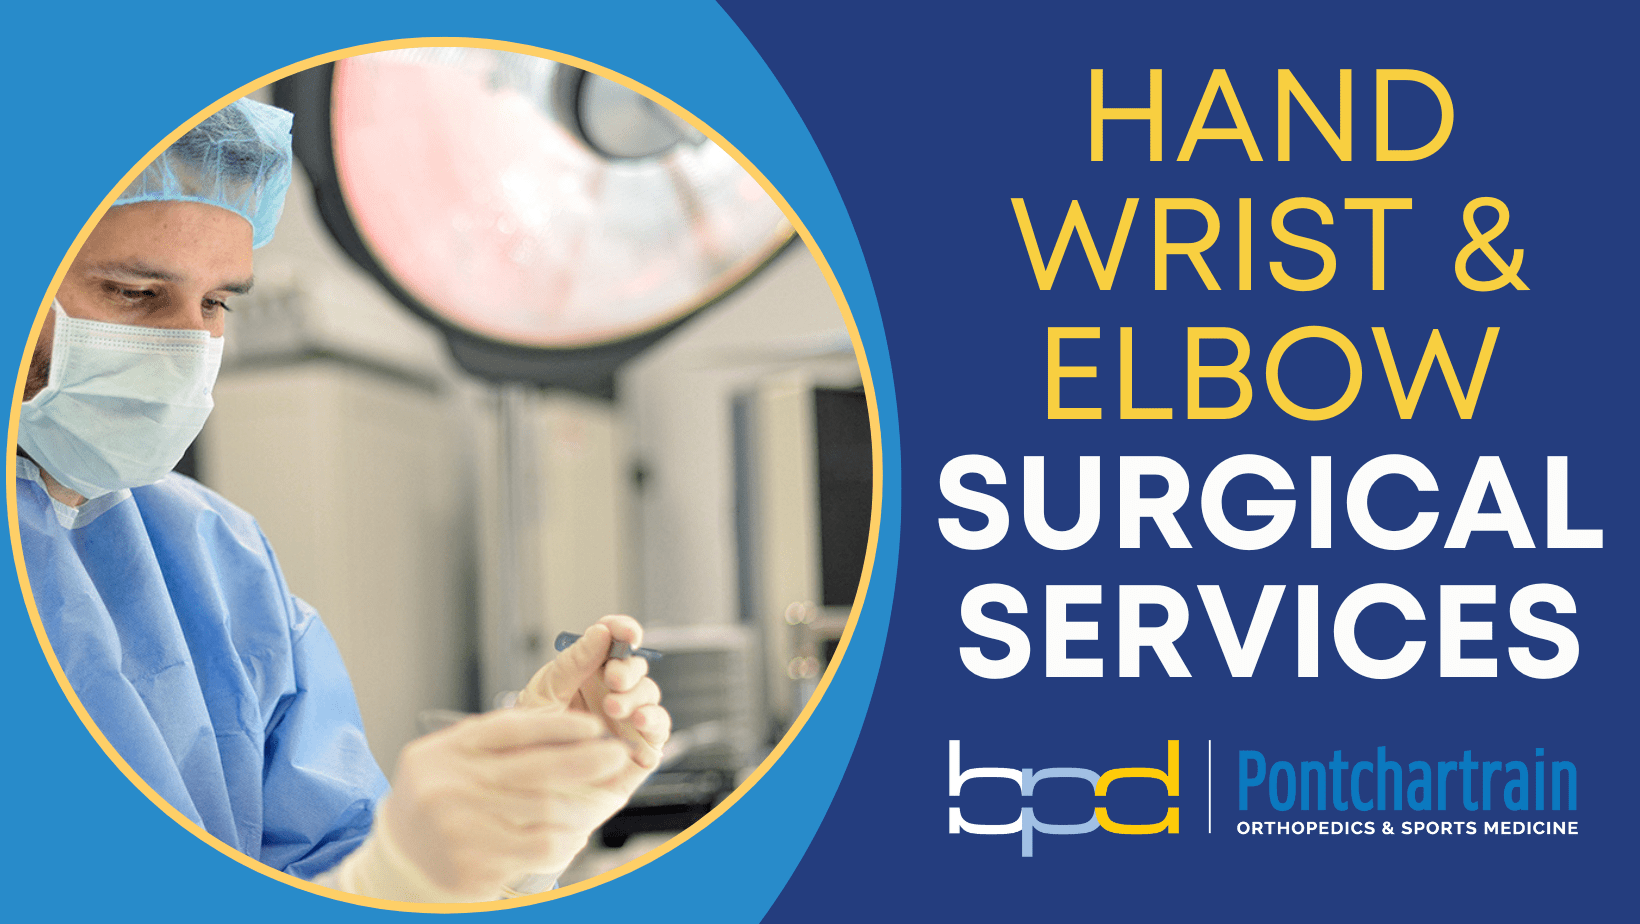 Hand Wrist & Elbow Surgical Services